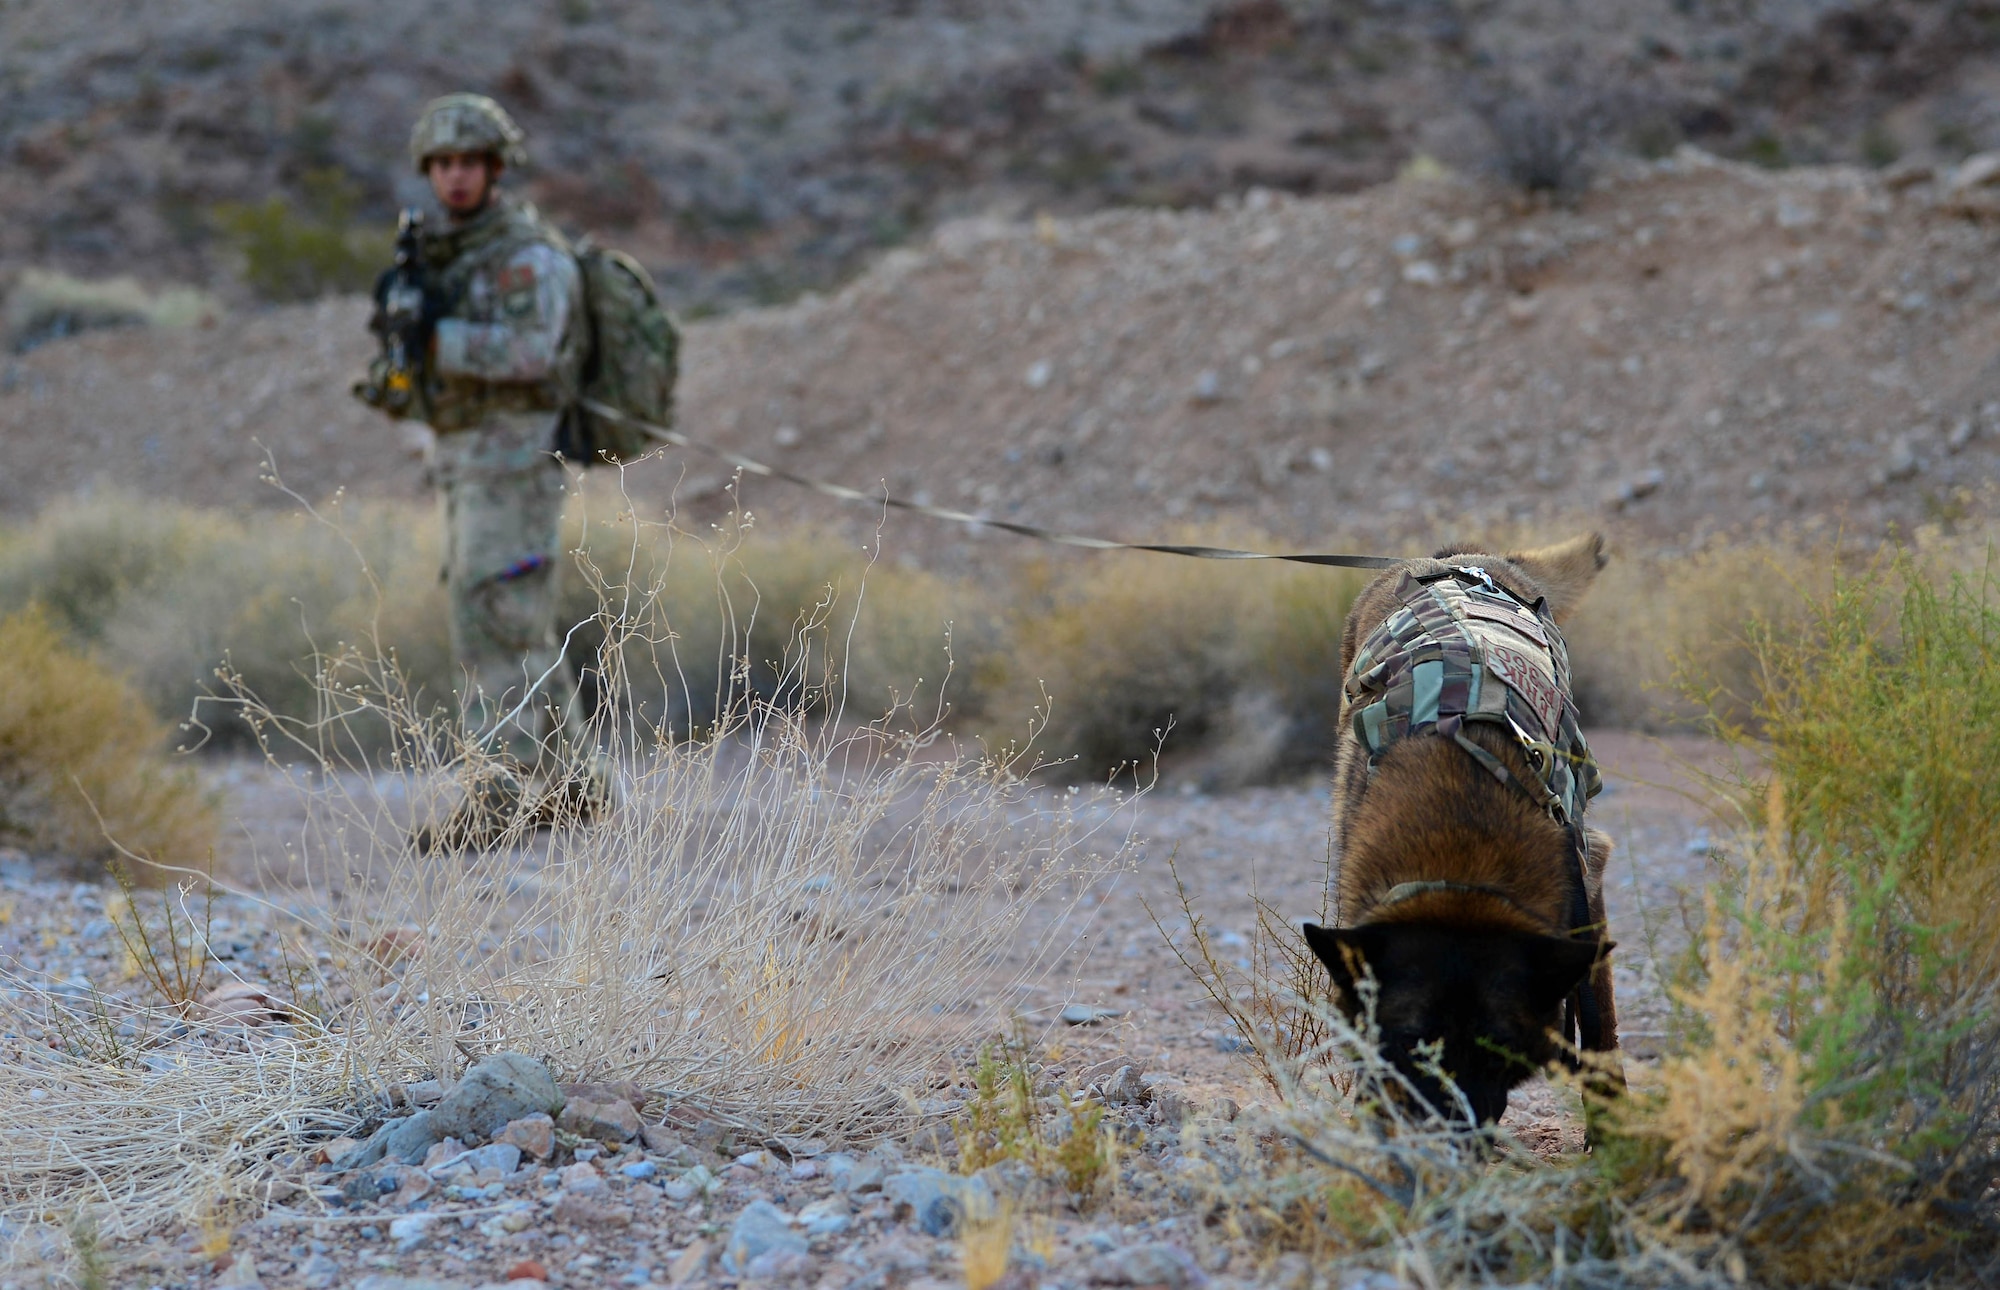 Staff Sgt. Juan Hinojosa, 99th Security Forces Squadron military working dog handler and Erik, 99th SFS MWD, check a trail for dangers during a training exercise Aug. 8, 2018, at Nellis Air Force Base, Nev. MWDs have been trained to recognize various substances with assistance from their handlers. (U.S. Air Force Photo by Airman 1st Class Haley Stevens)